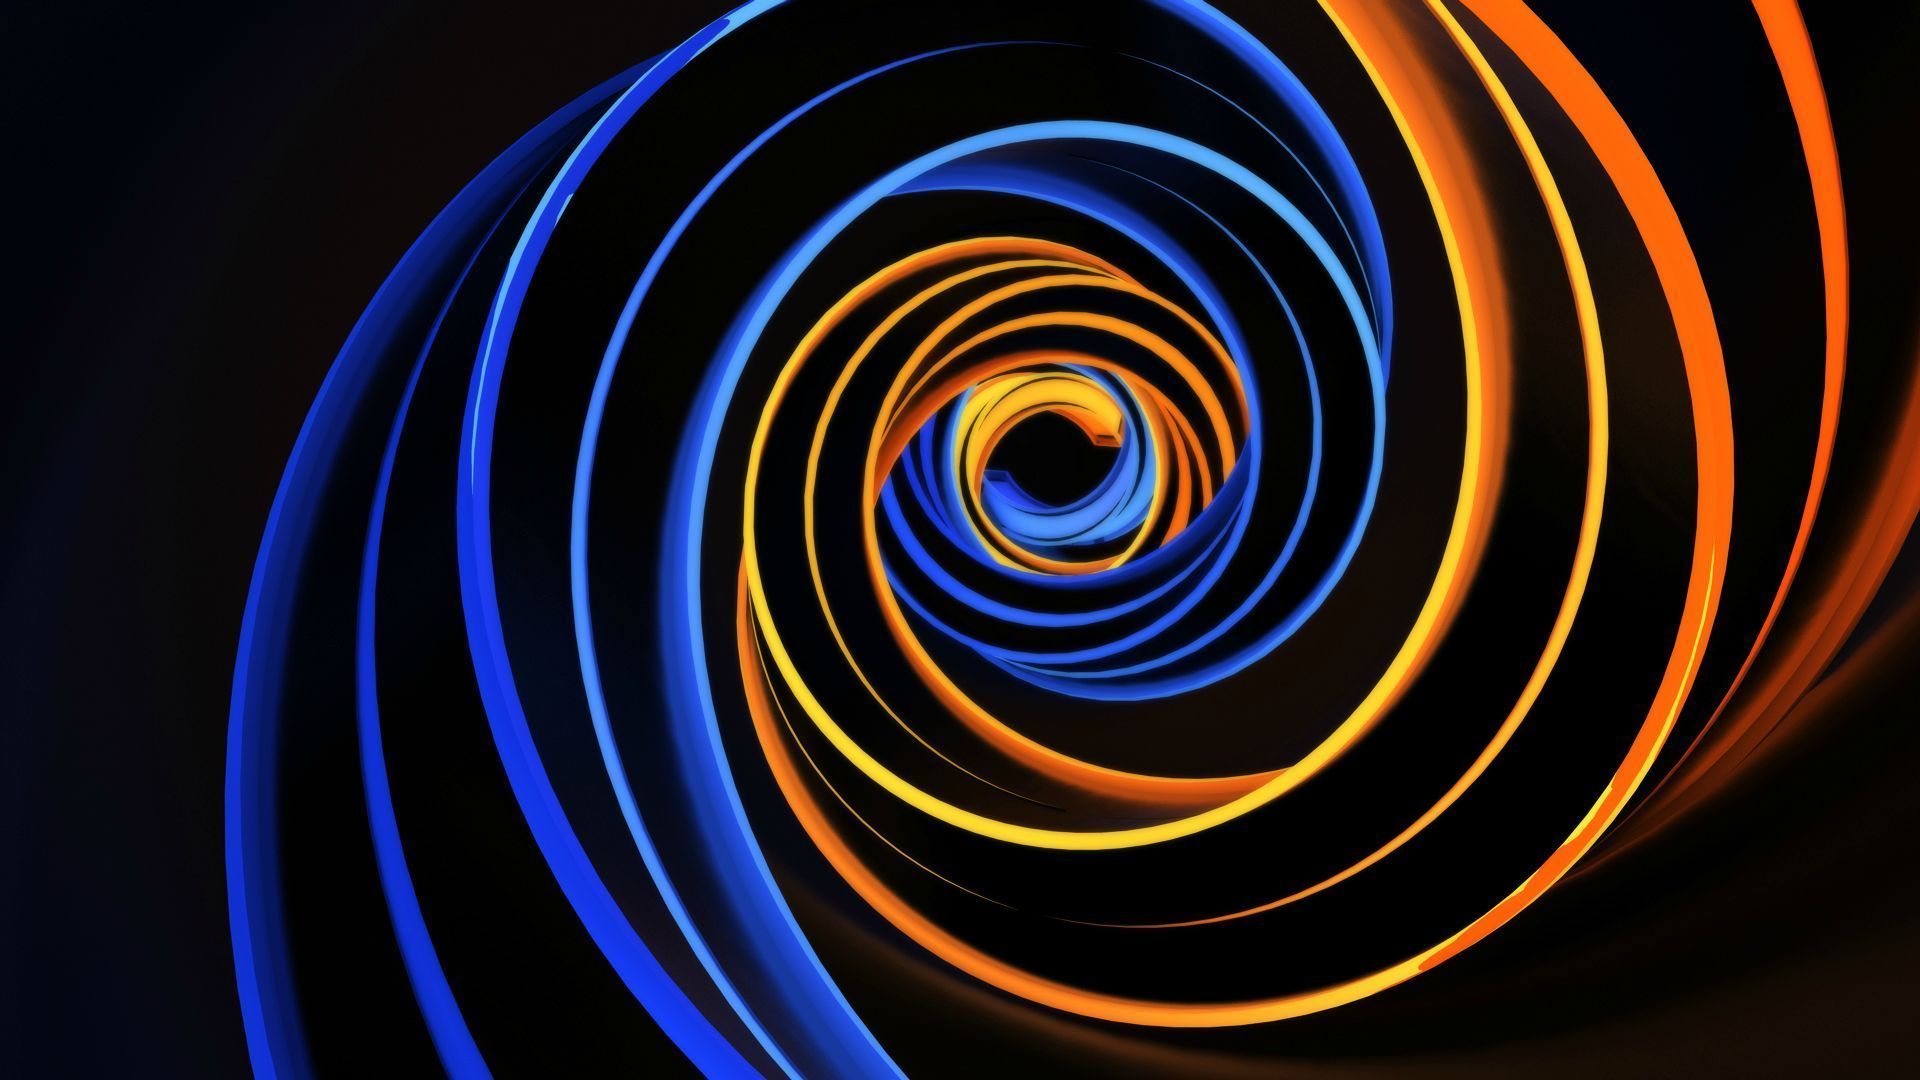 Spiral #Abstract #hd #wallpaper for #android #iphone #ipad